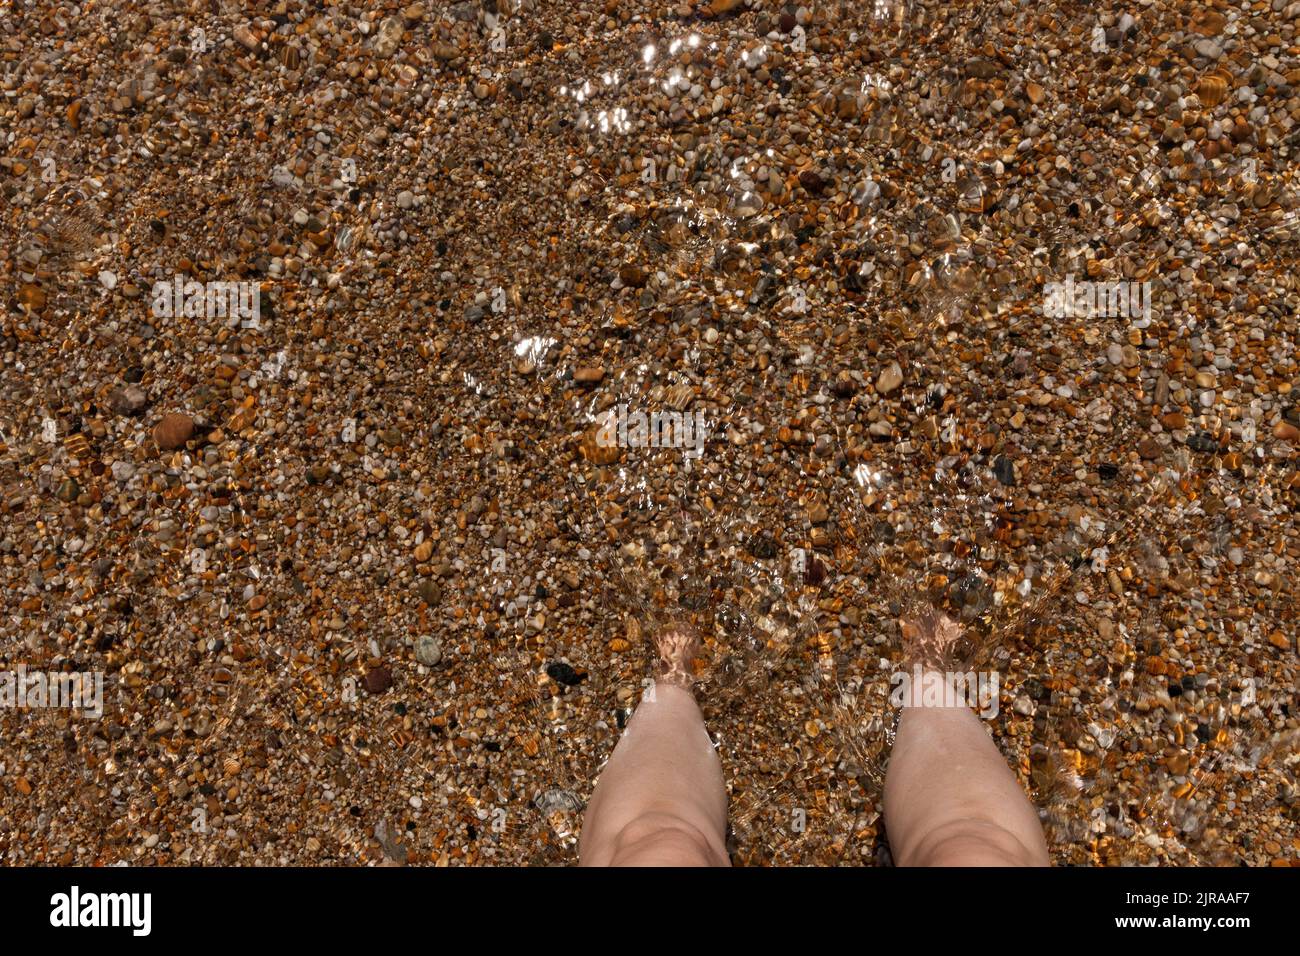 A close up view of a pair of feet buried into the sand-pebbles in the celar ocean water Stock Photo